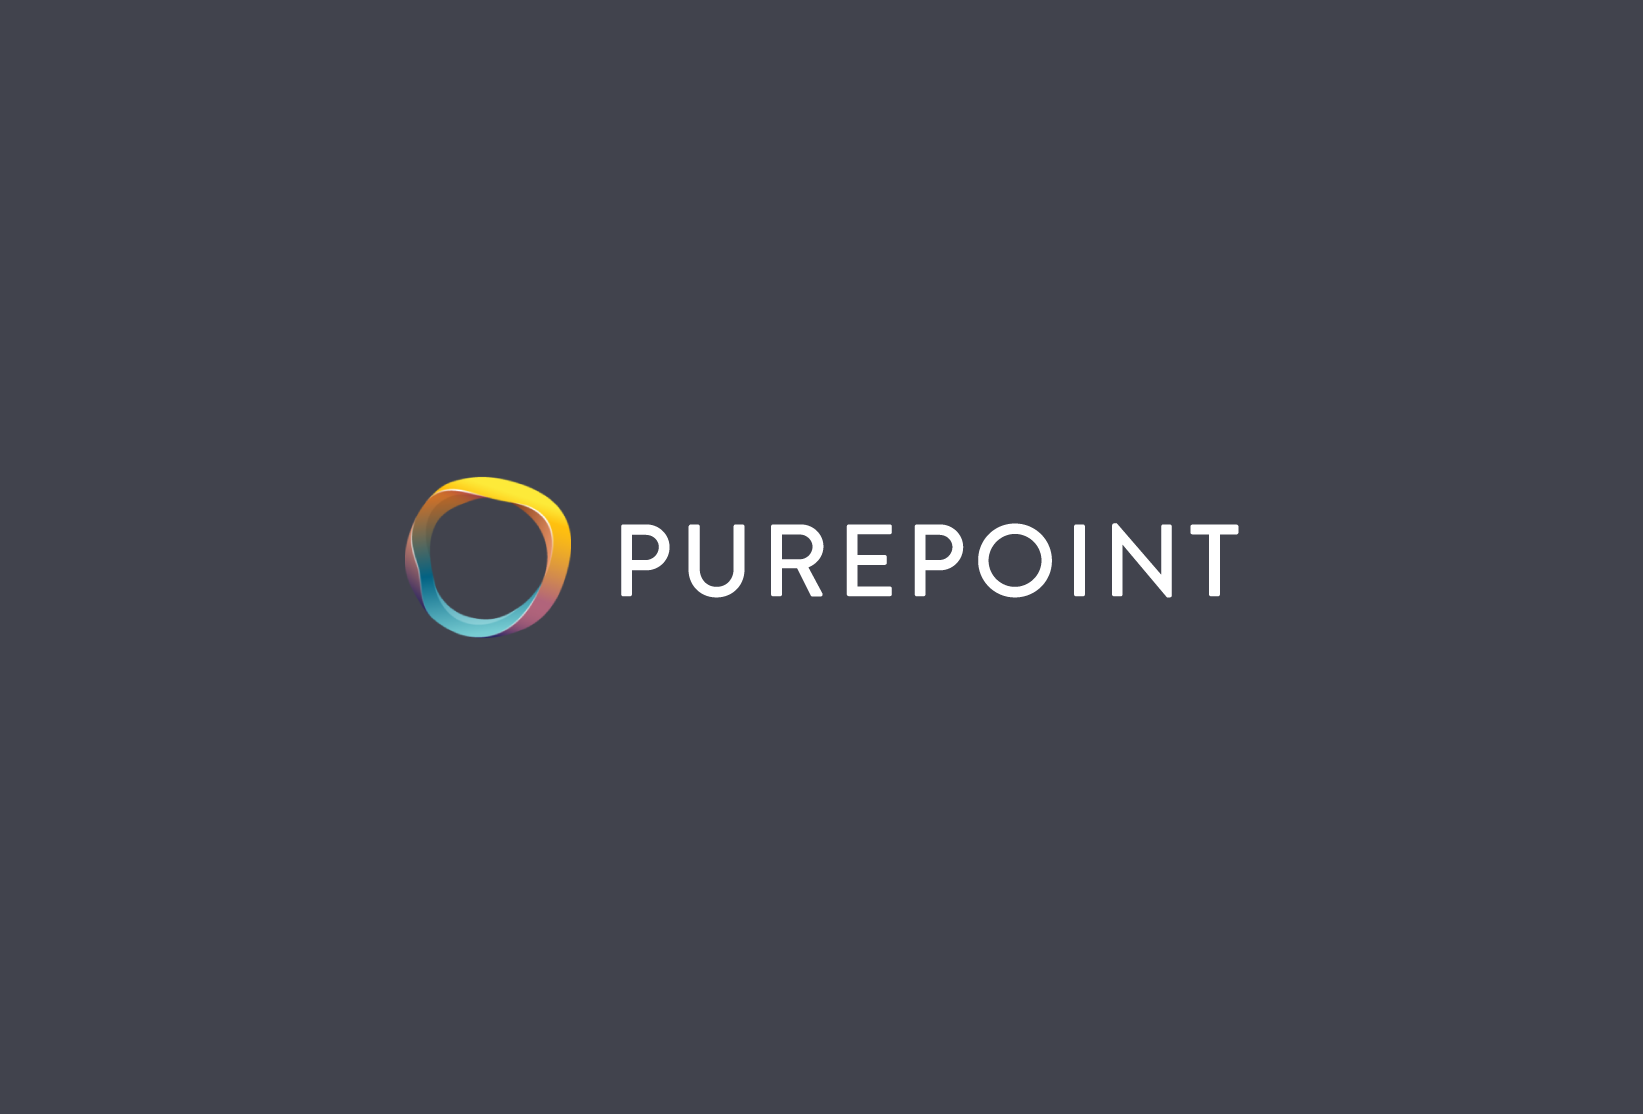 Thank you, Purepoint!